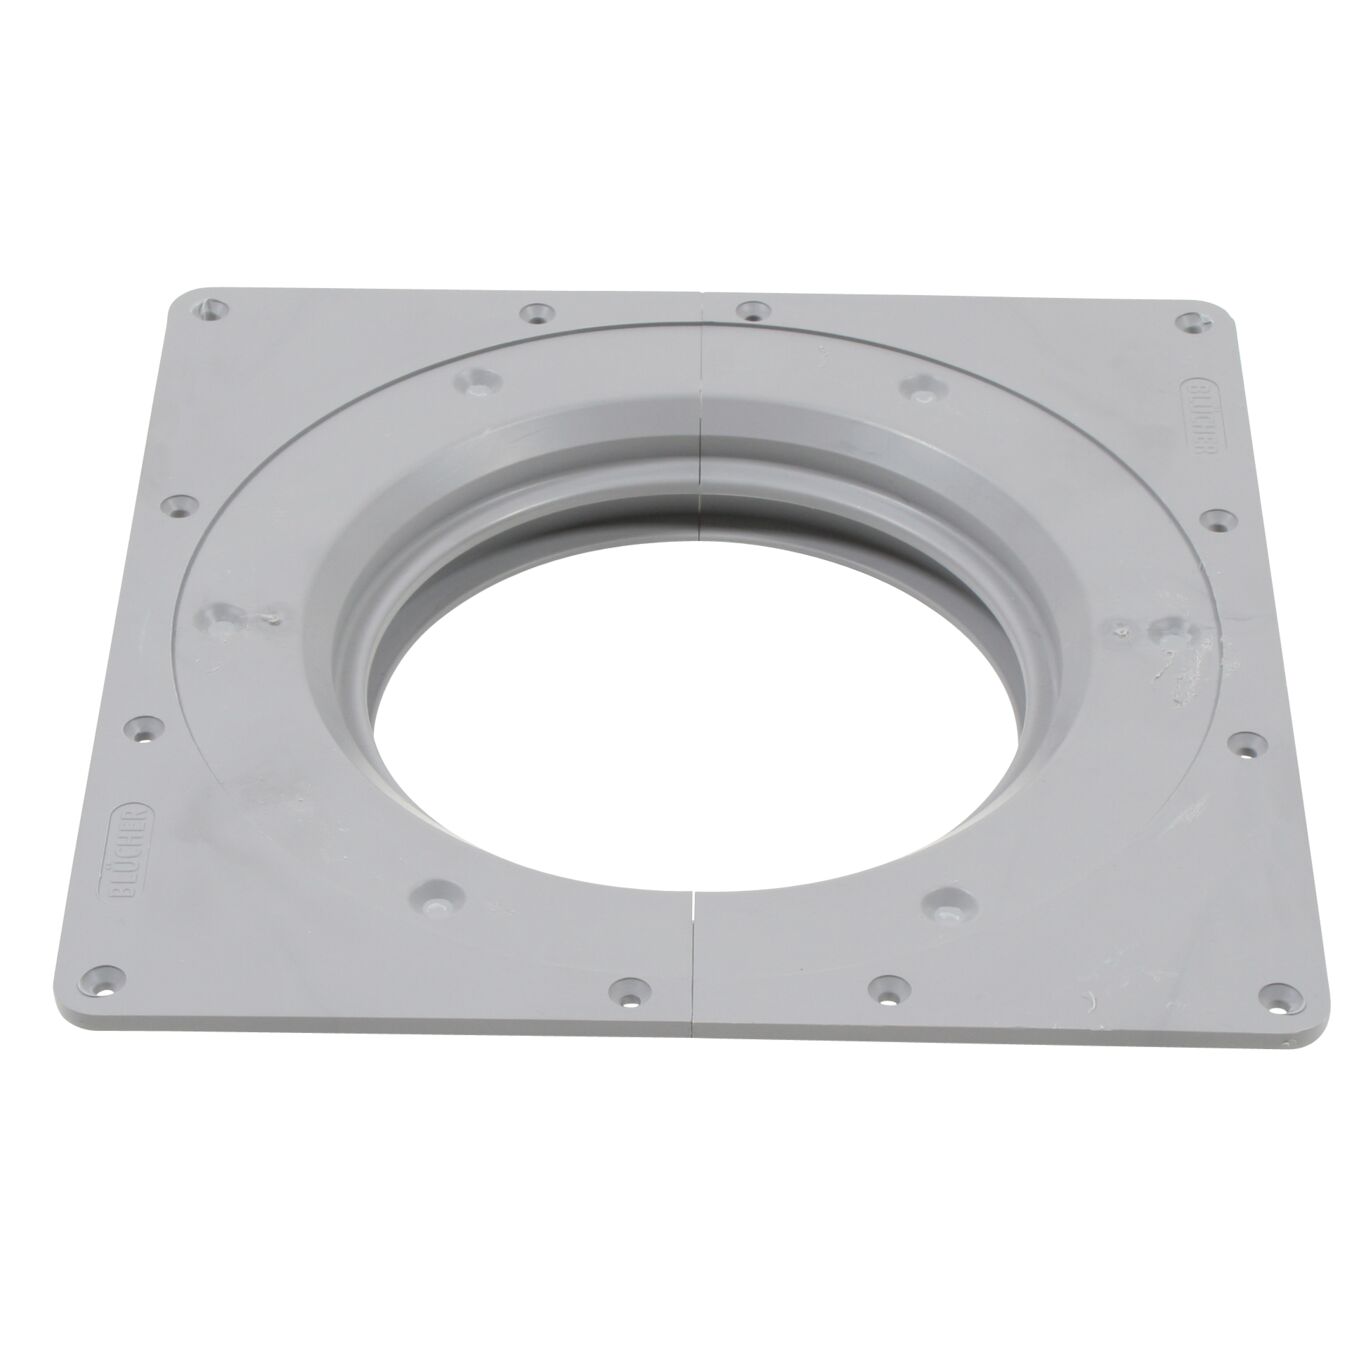 Product Image - Spare parts-drain